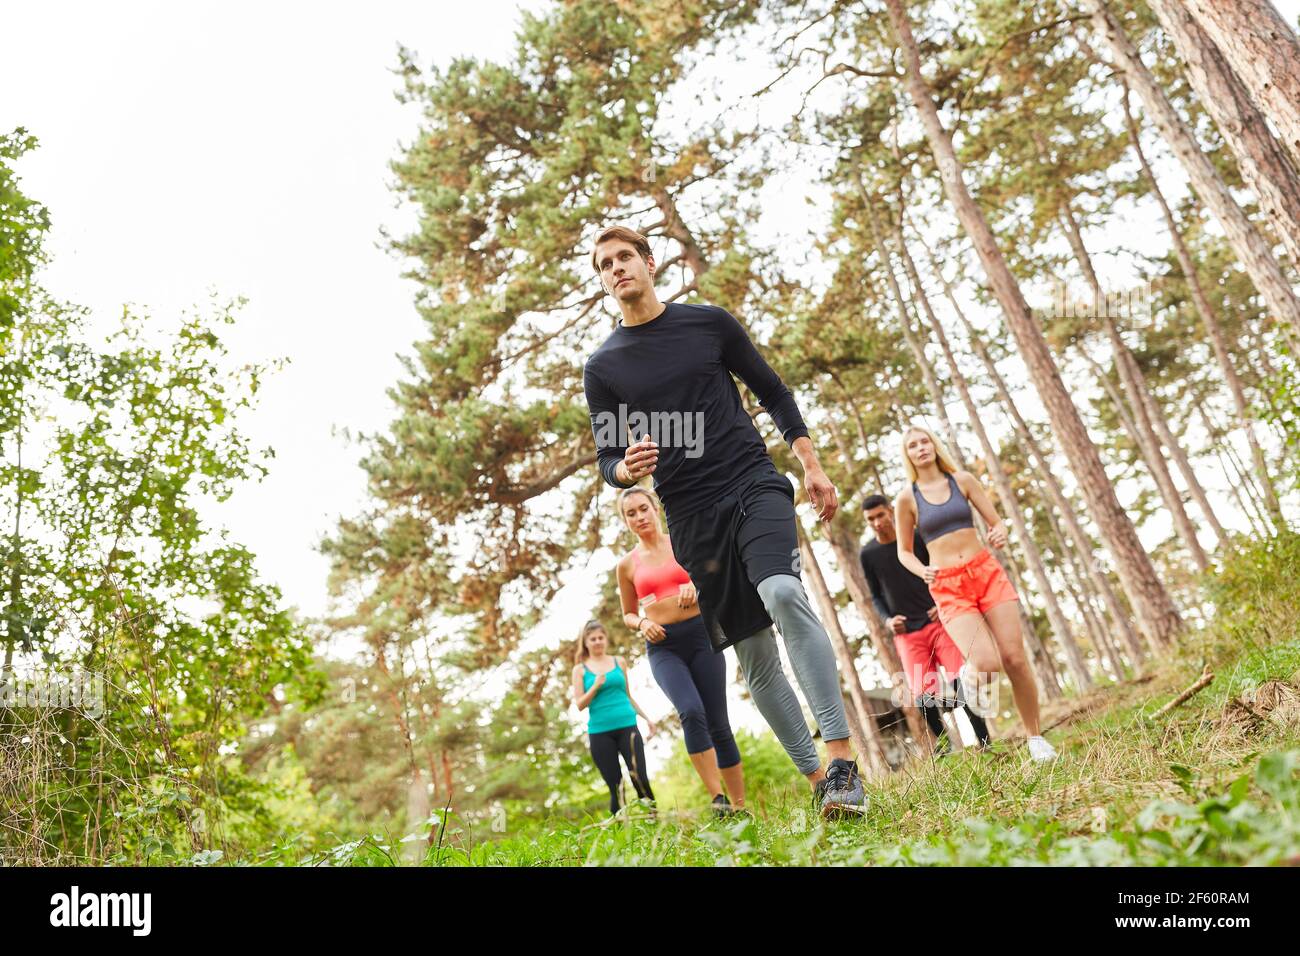 Group of friends at the endurance run in nature in the forest for stamina and fitness Stock Photo